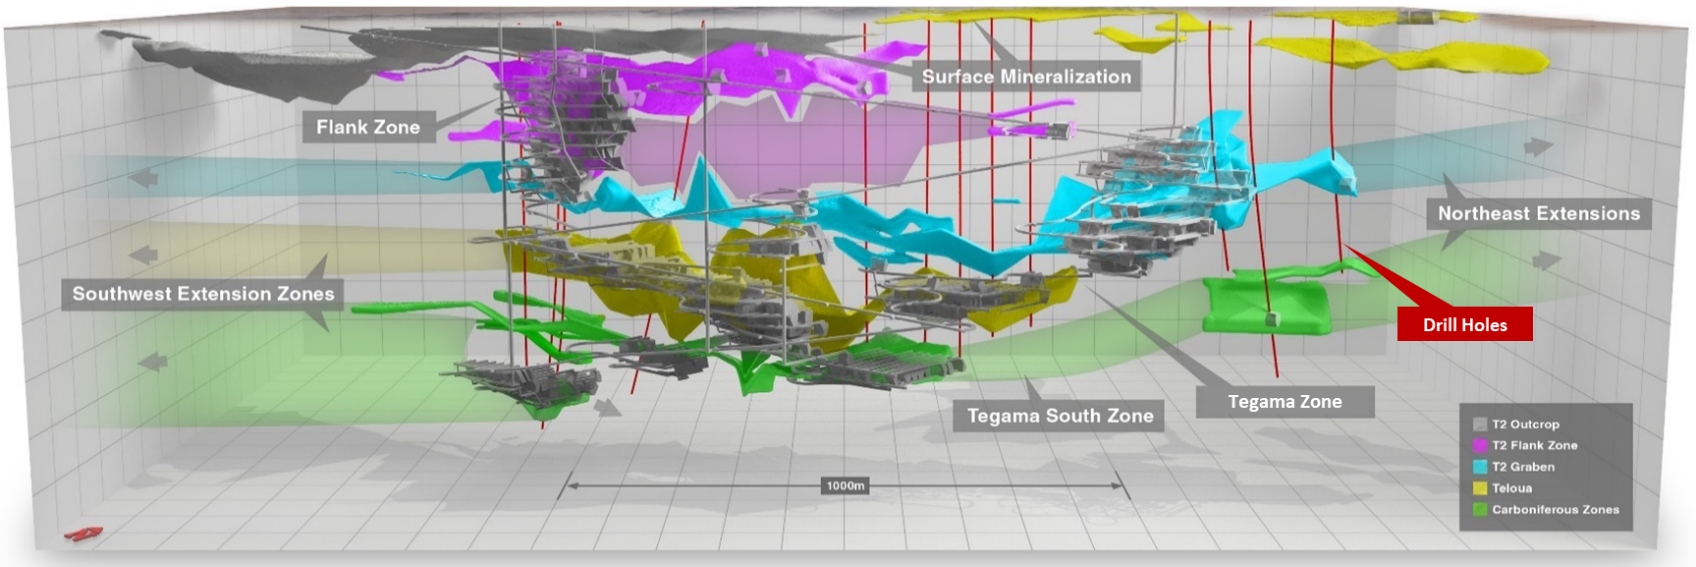 Figure 1 DASA mineralized zones and underground conceptual mine workings as per the PEA